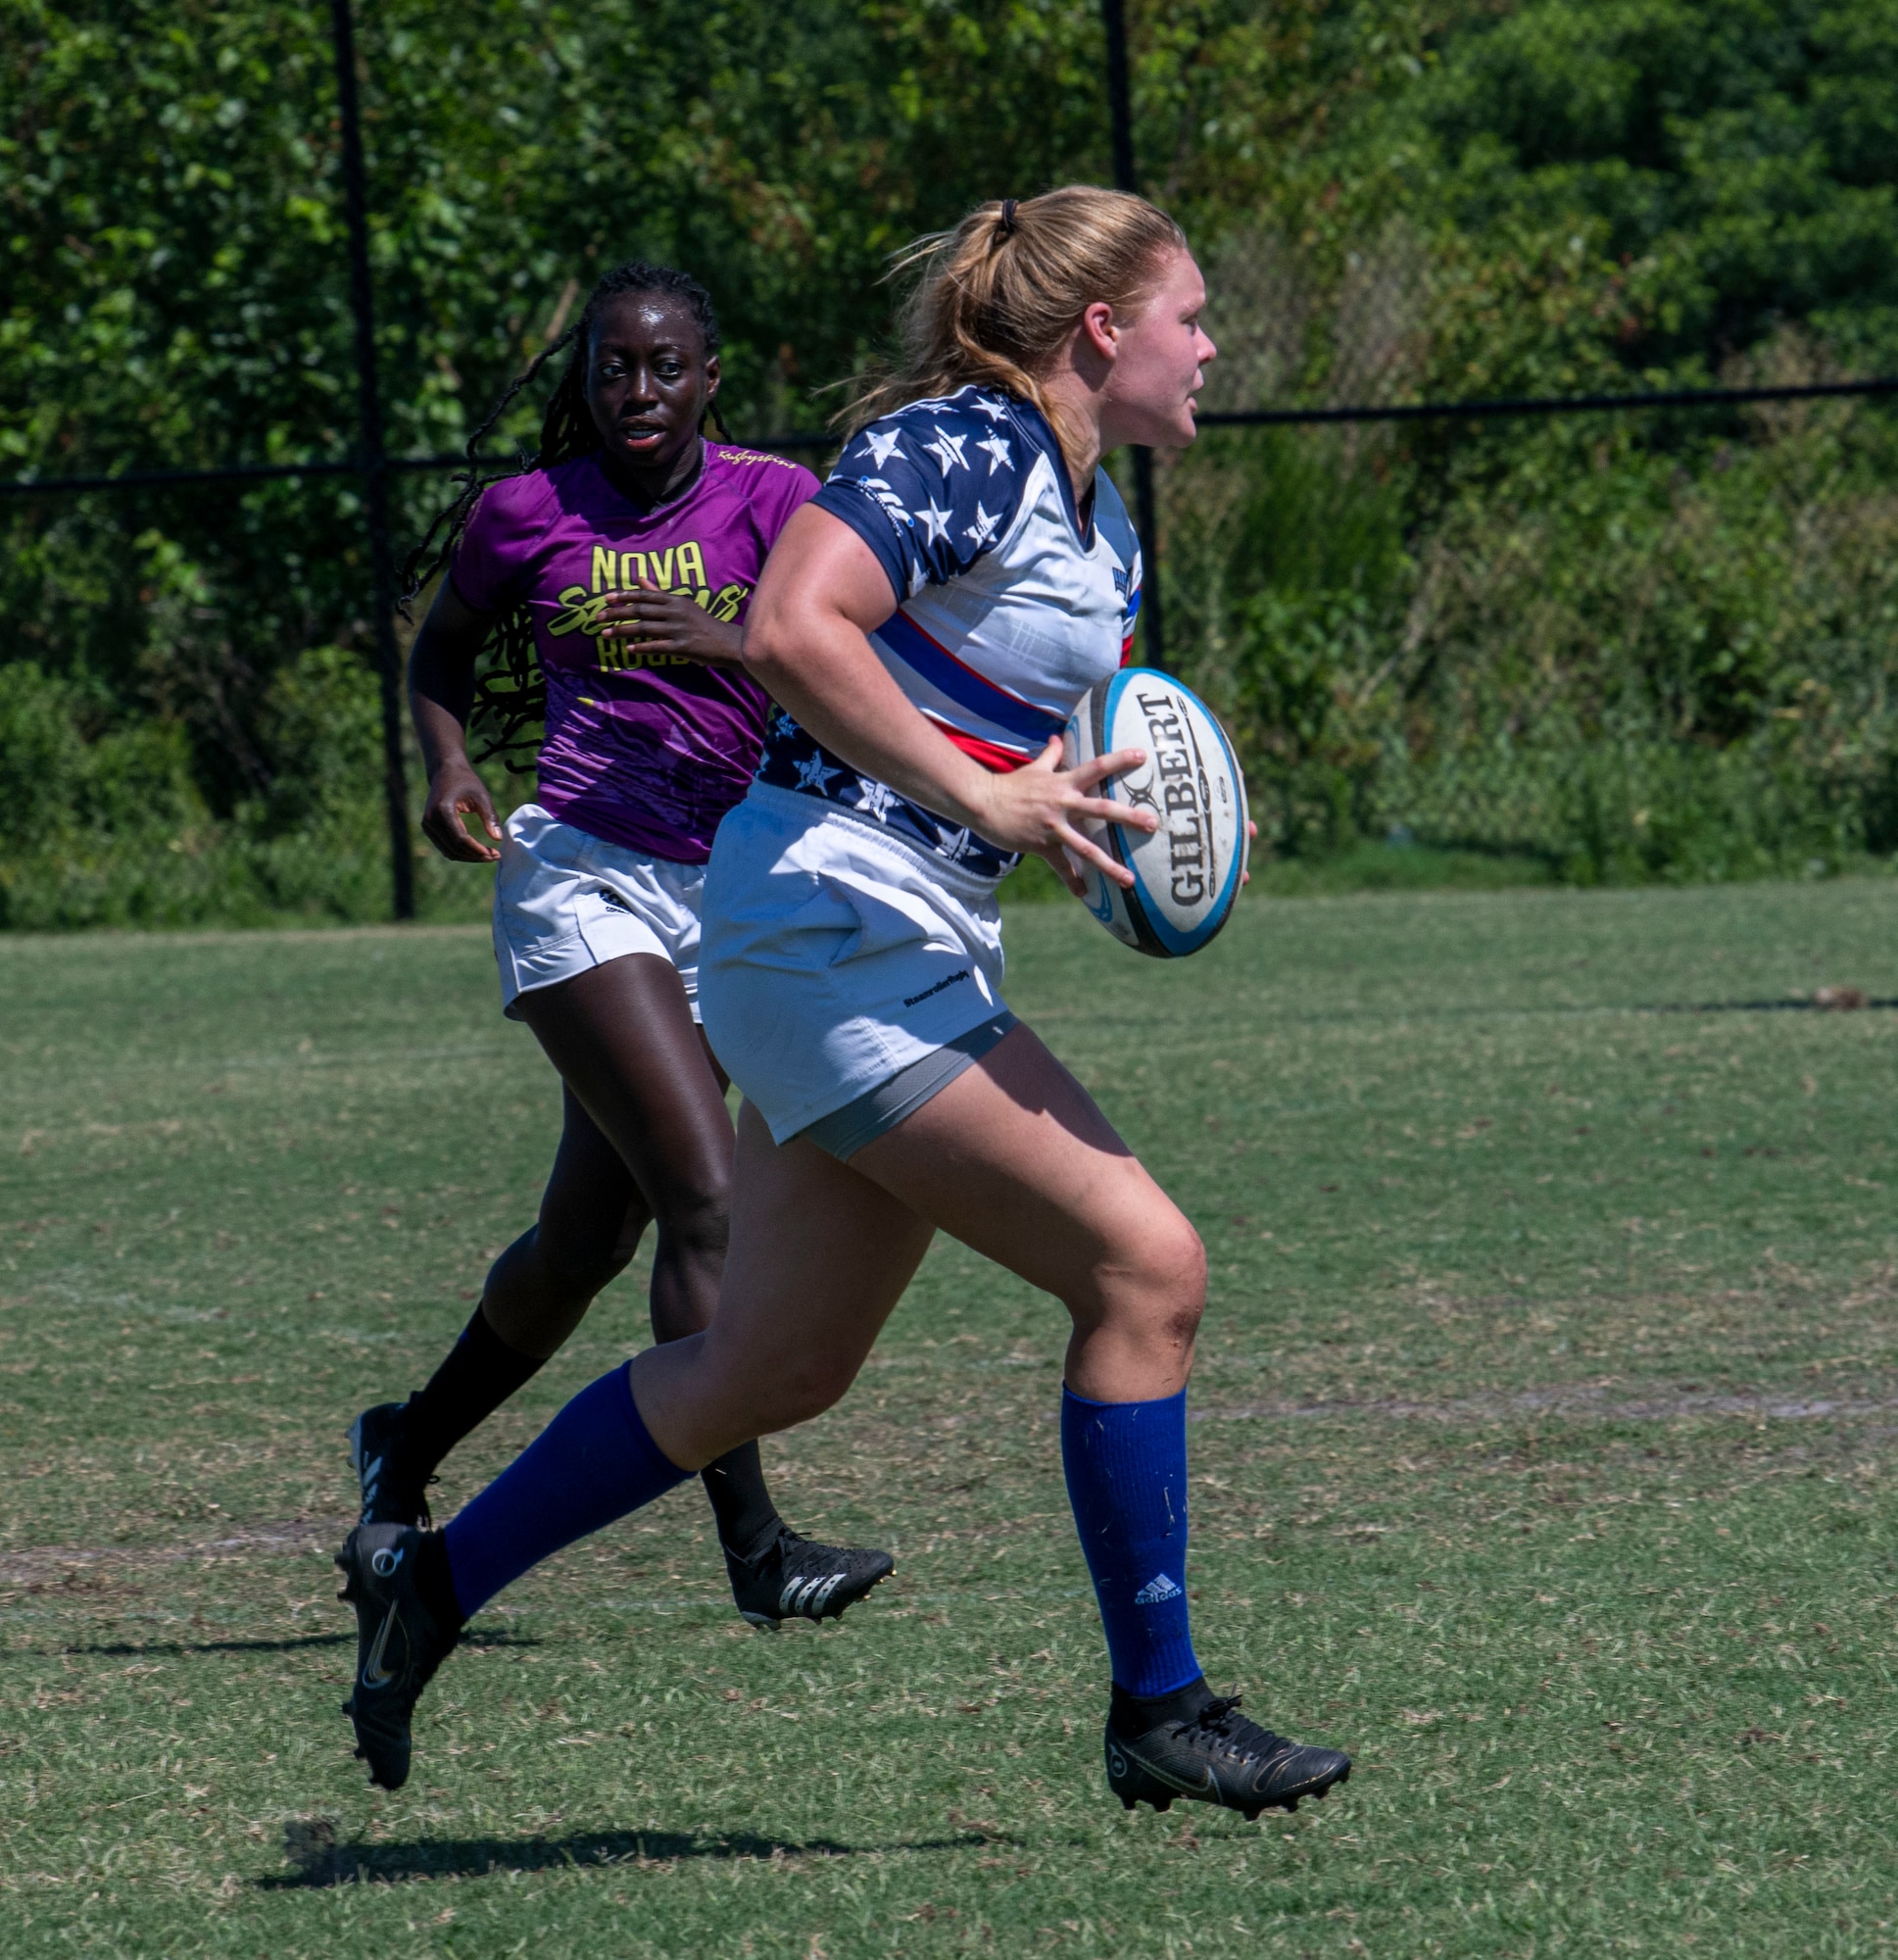 Senior Airman Nicole Mitchell, 433rd Civil Engineer Squadron emergency management apprentice and a member of the Department of Air Force Women’s Rugby Team, runs to the goal line during a game against the Northern Virginia Rugby Team after competing in the Annual Armed Forces Women’s Rugby Championship in Wilmington, North Carolina, June 26, 2022. The championship was hosted for three days with tournaments dedicated to the Armed Forces teams and civilian teams across the United States. (U.S. Air Force photo by Airman 1st Class Sabrina Fuller)